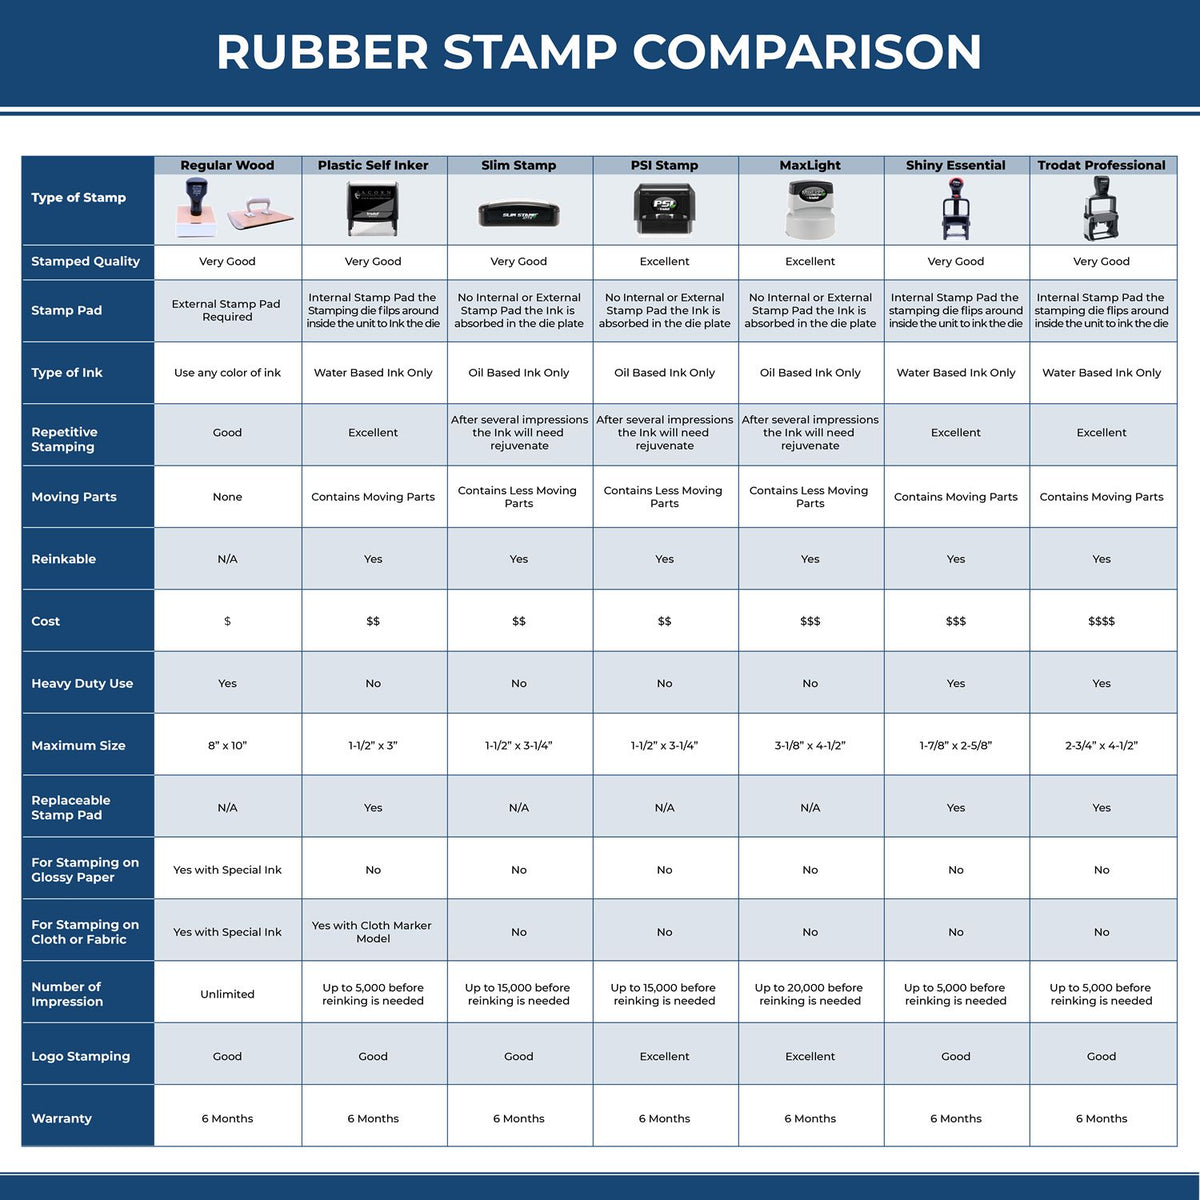 A comparison chart for the different types of mount models available for the Heavy-Duty Kansas Rectangular Notary Stamp.